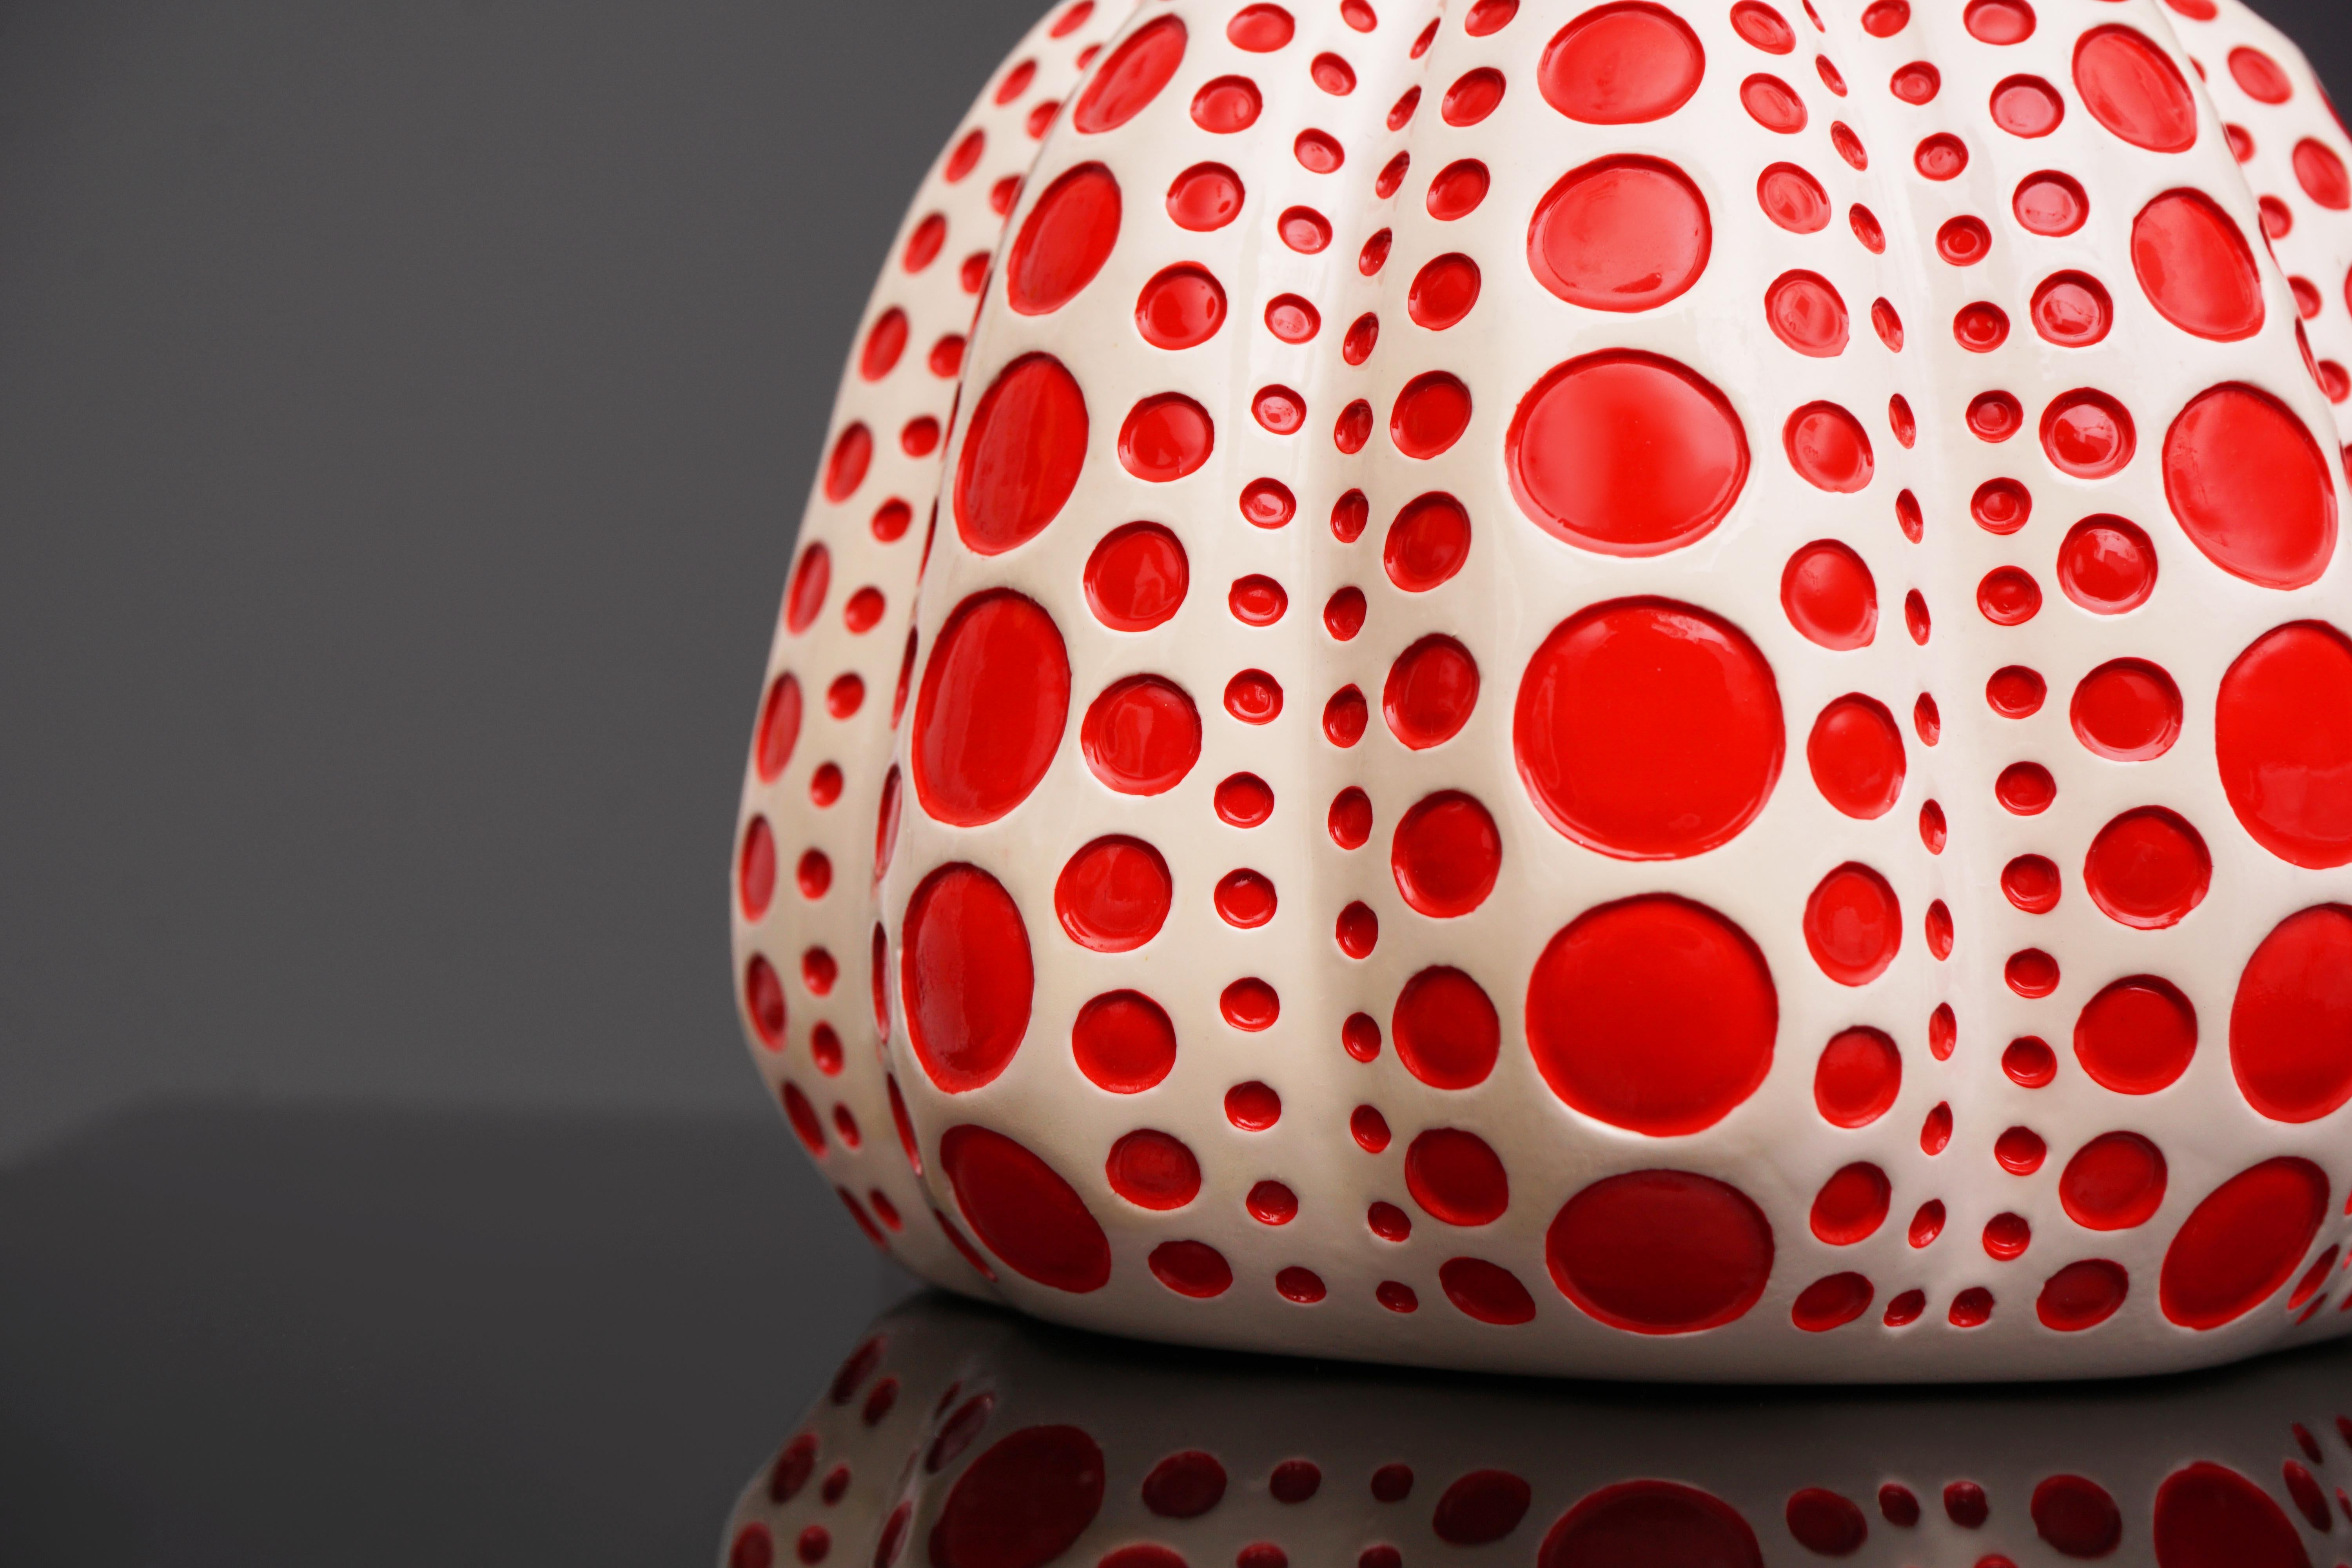 The ’Pumpkin' sculpture is a polka-dotted painted lacquer resin collectible object by the legendary contemporary Artist, Yayoi Kusama. Created in 2016, the polka-dot pumpkin series is a quintessential example of Kusama’s iconic spot-patterned motif,